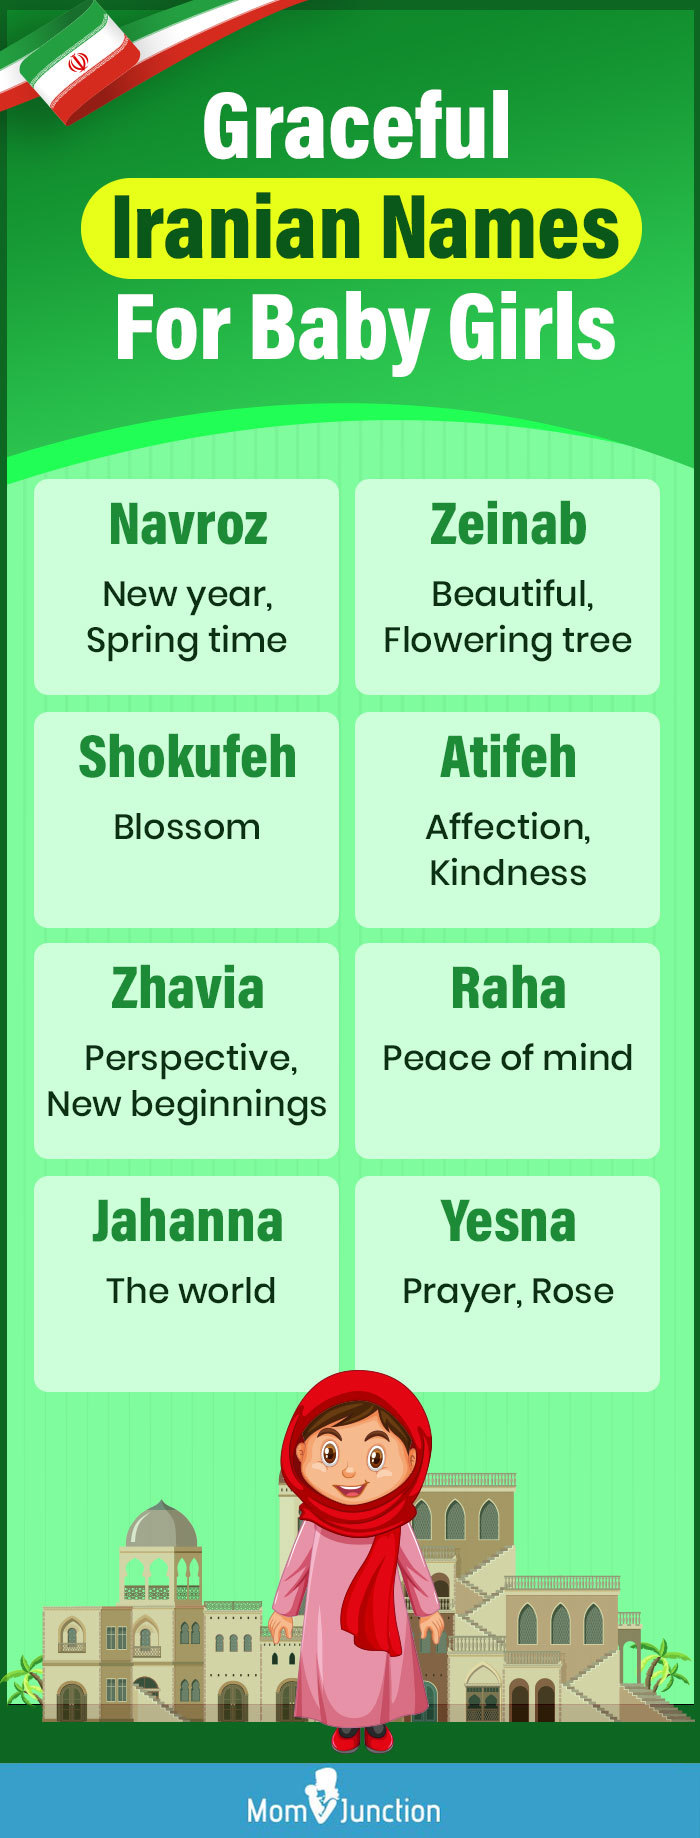 graceful iranian names for baby girls (infographic)